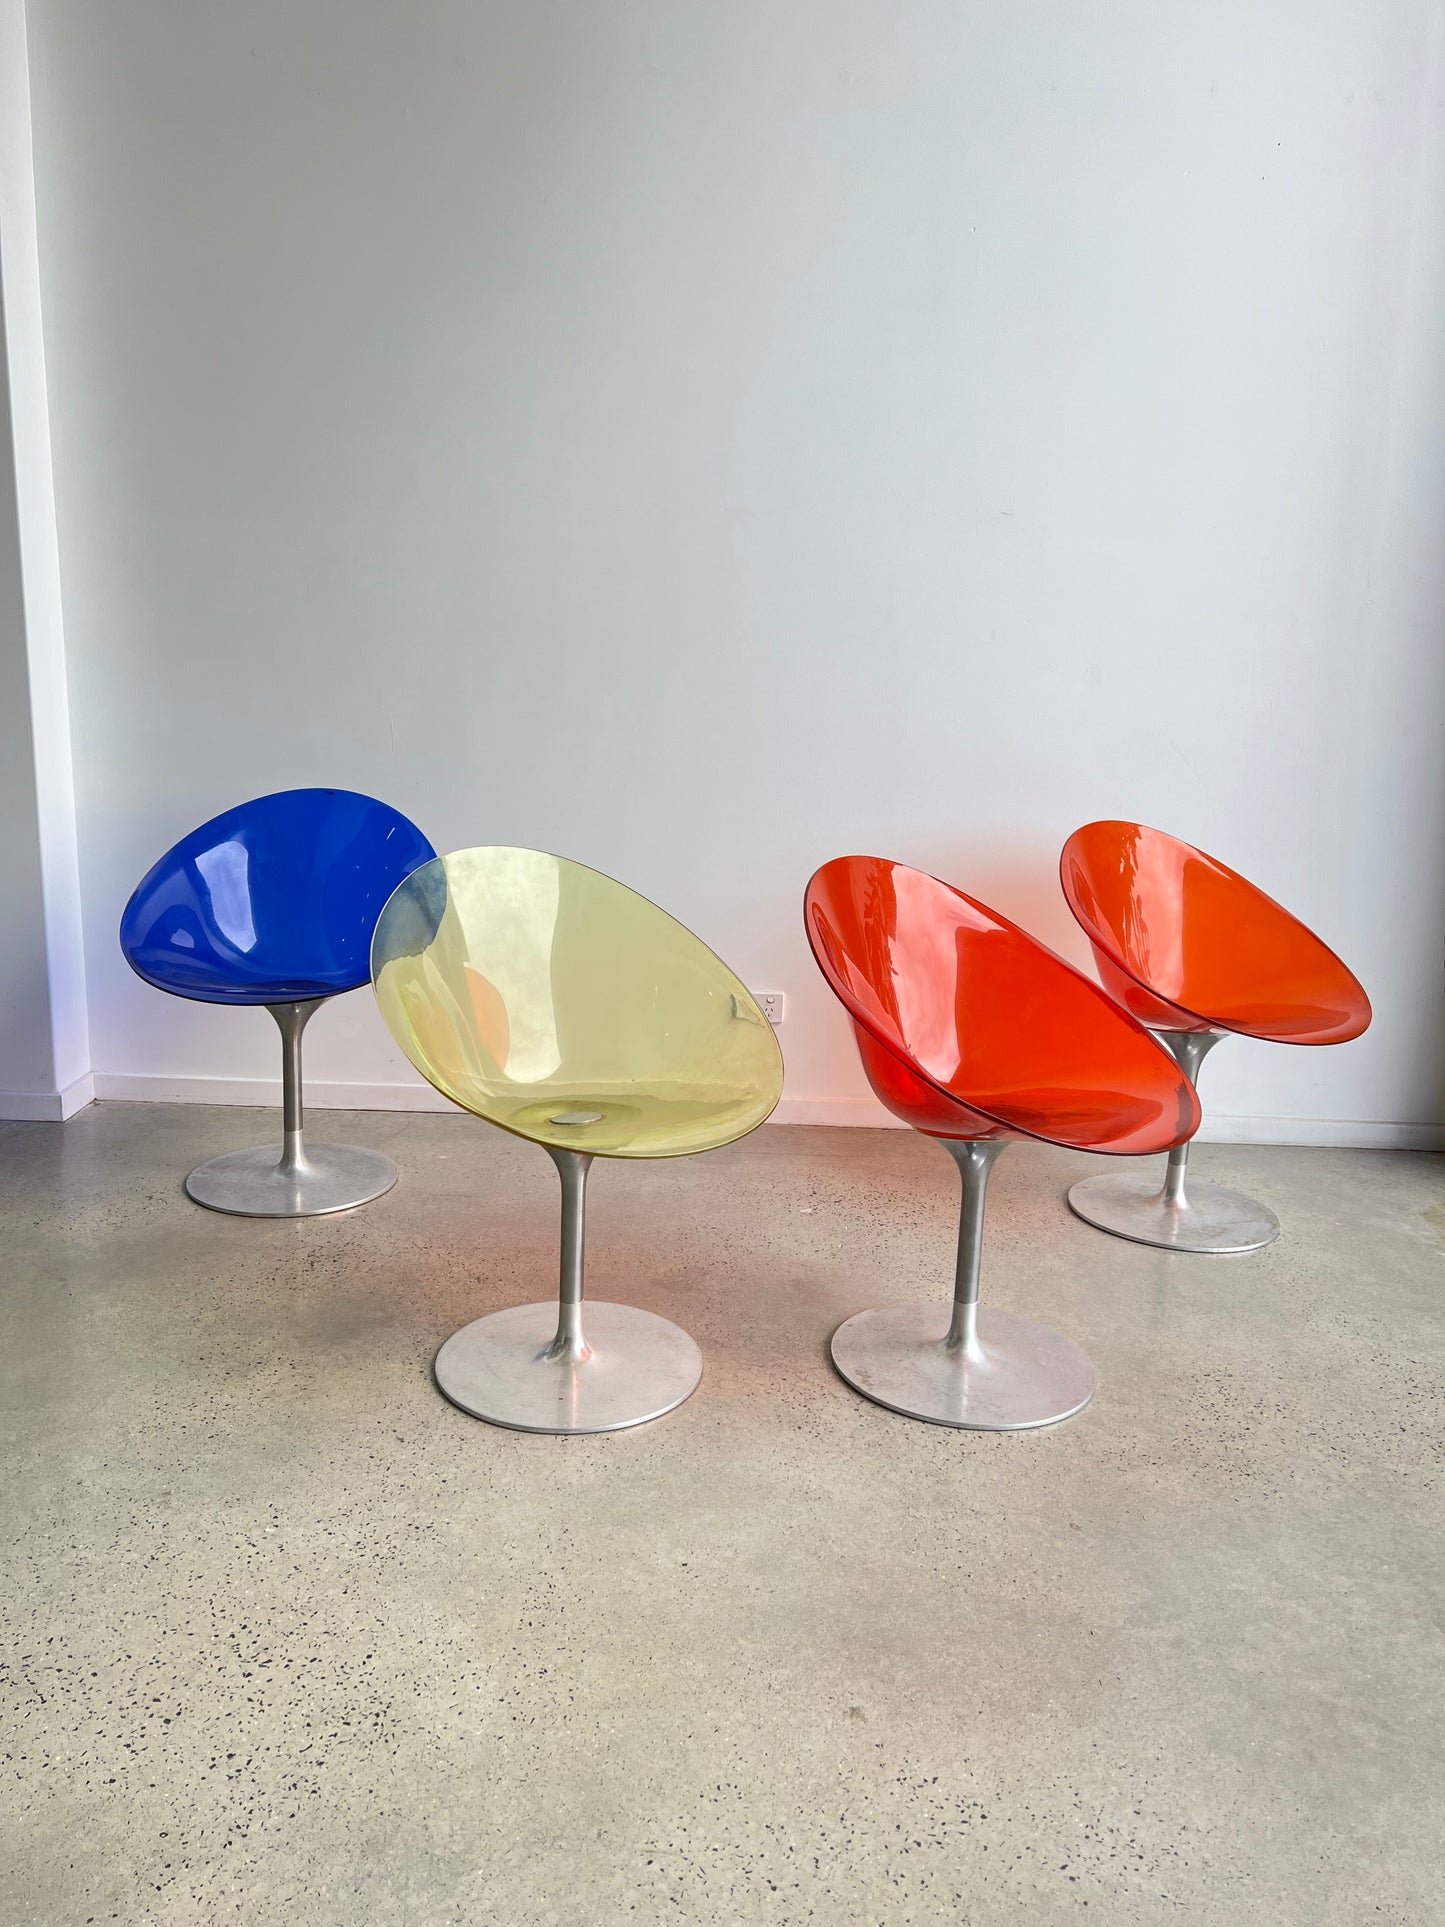 "Eros" by Philippe Starck for Kartell Swivel Chairs, 2001